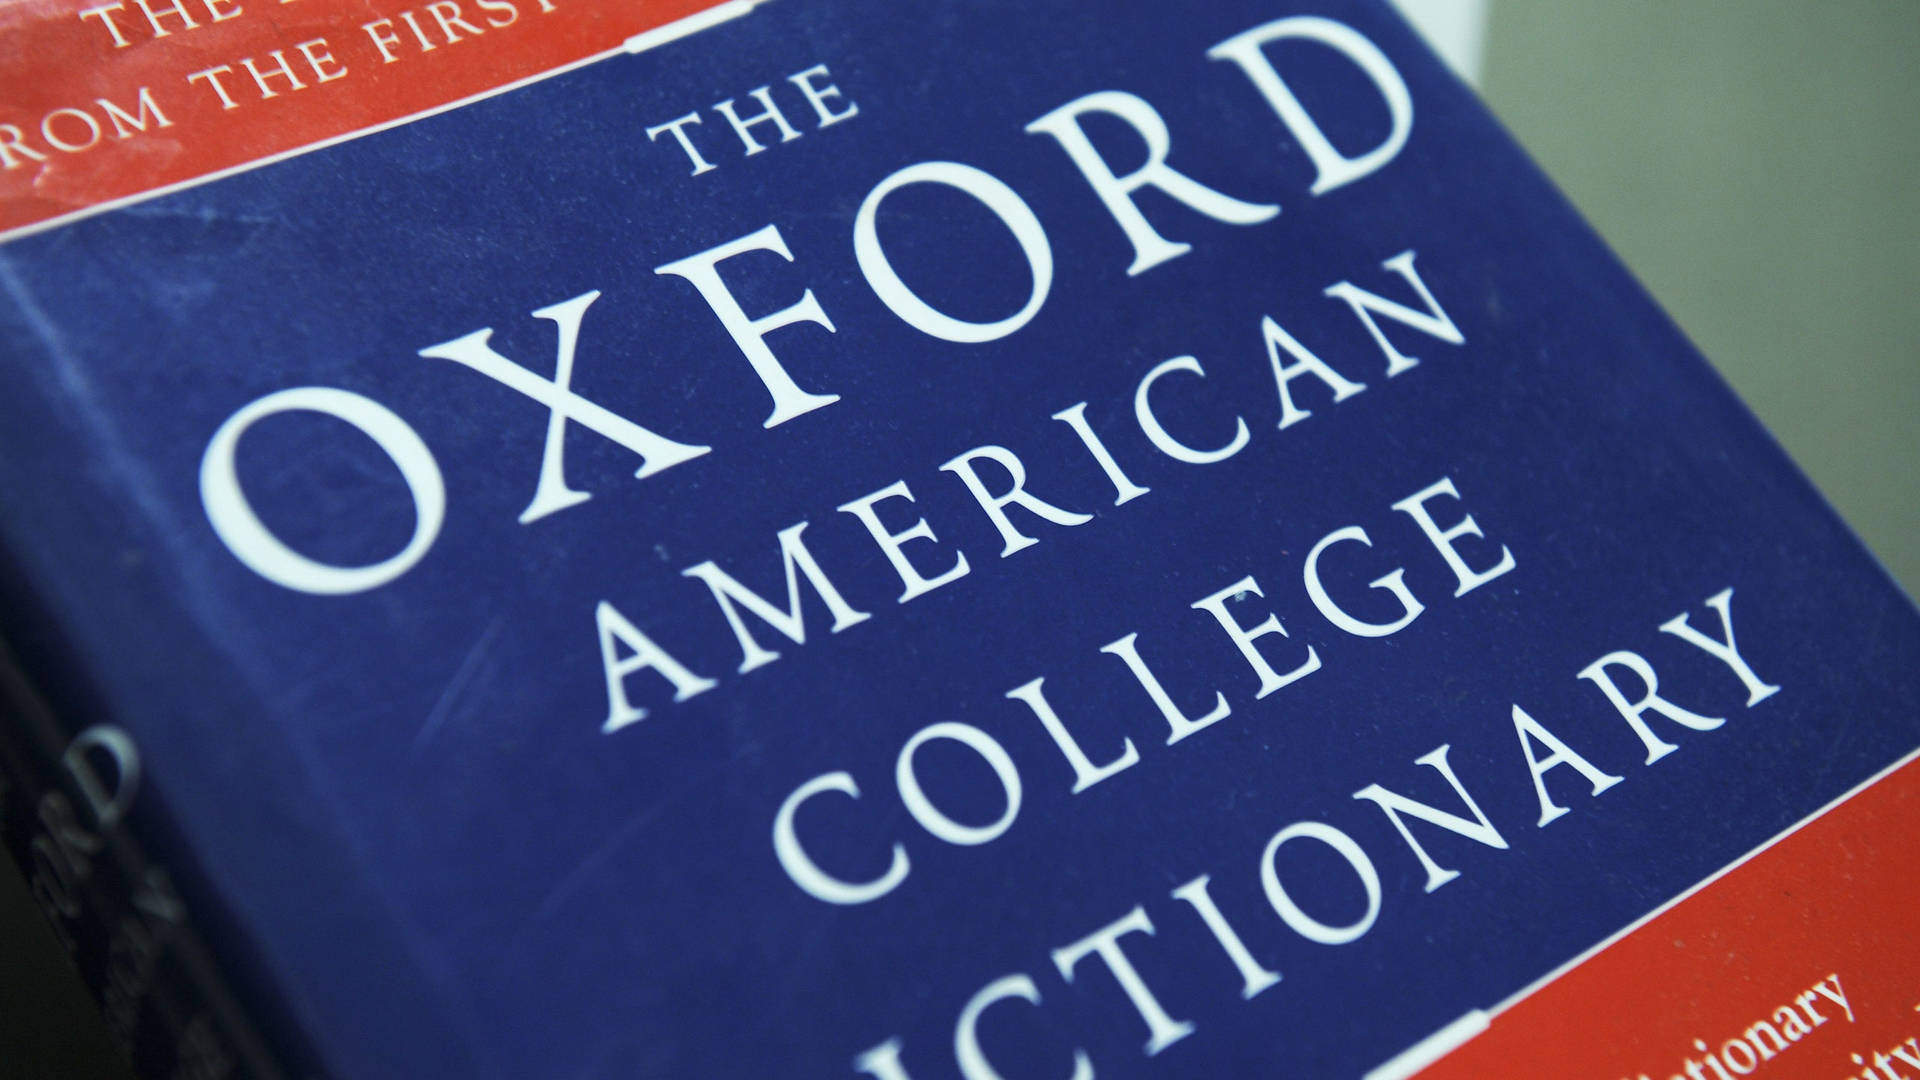 Oxford American College Dictionary